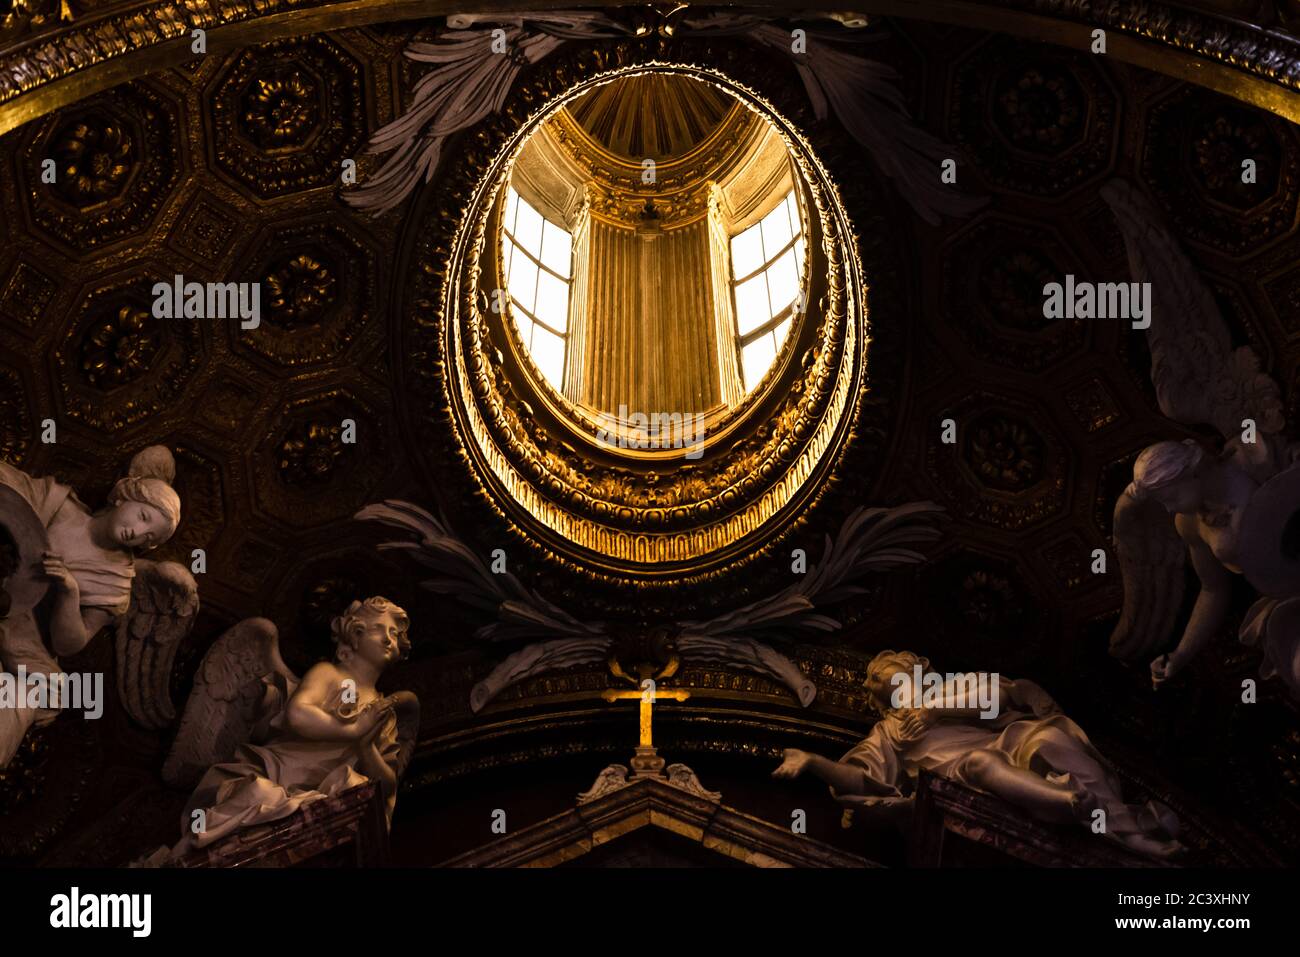 Skylight guarded by statues of angels in a church in Rome, Italy Stock Photo